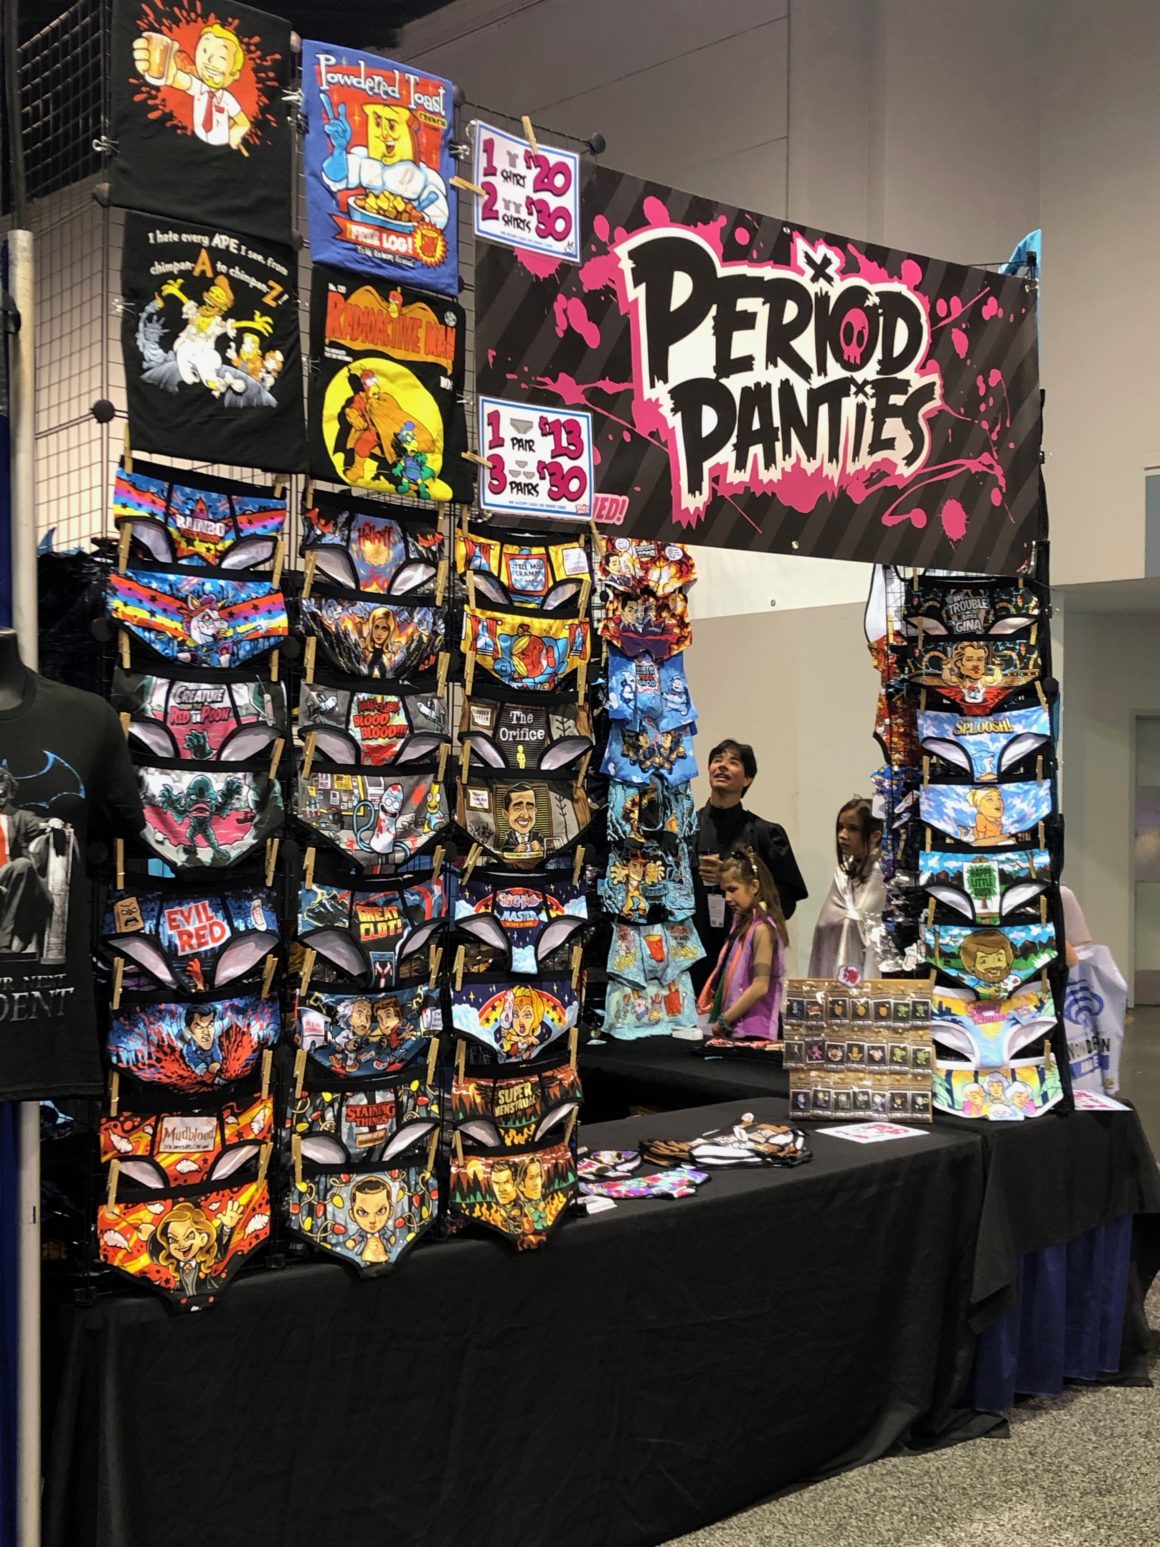 One of the most unique booths at WonderCon. Photo: Danny Pham/dorkaholics.